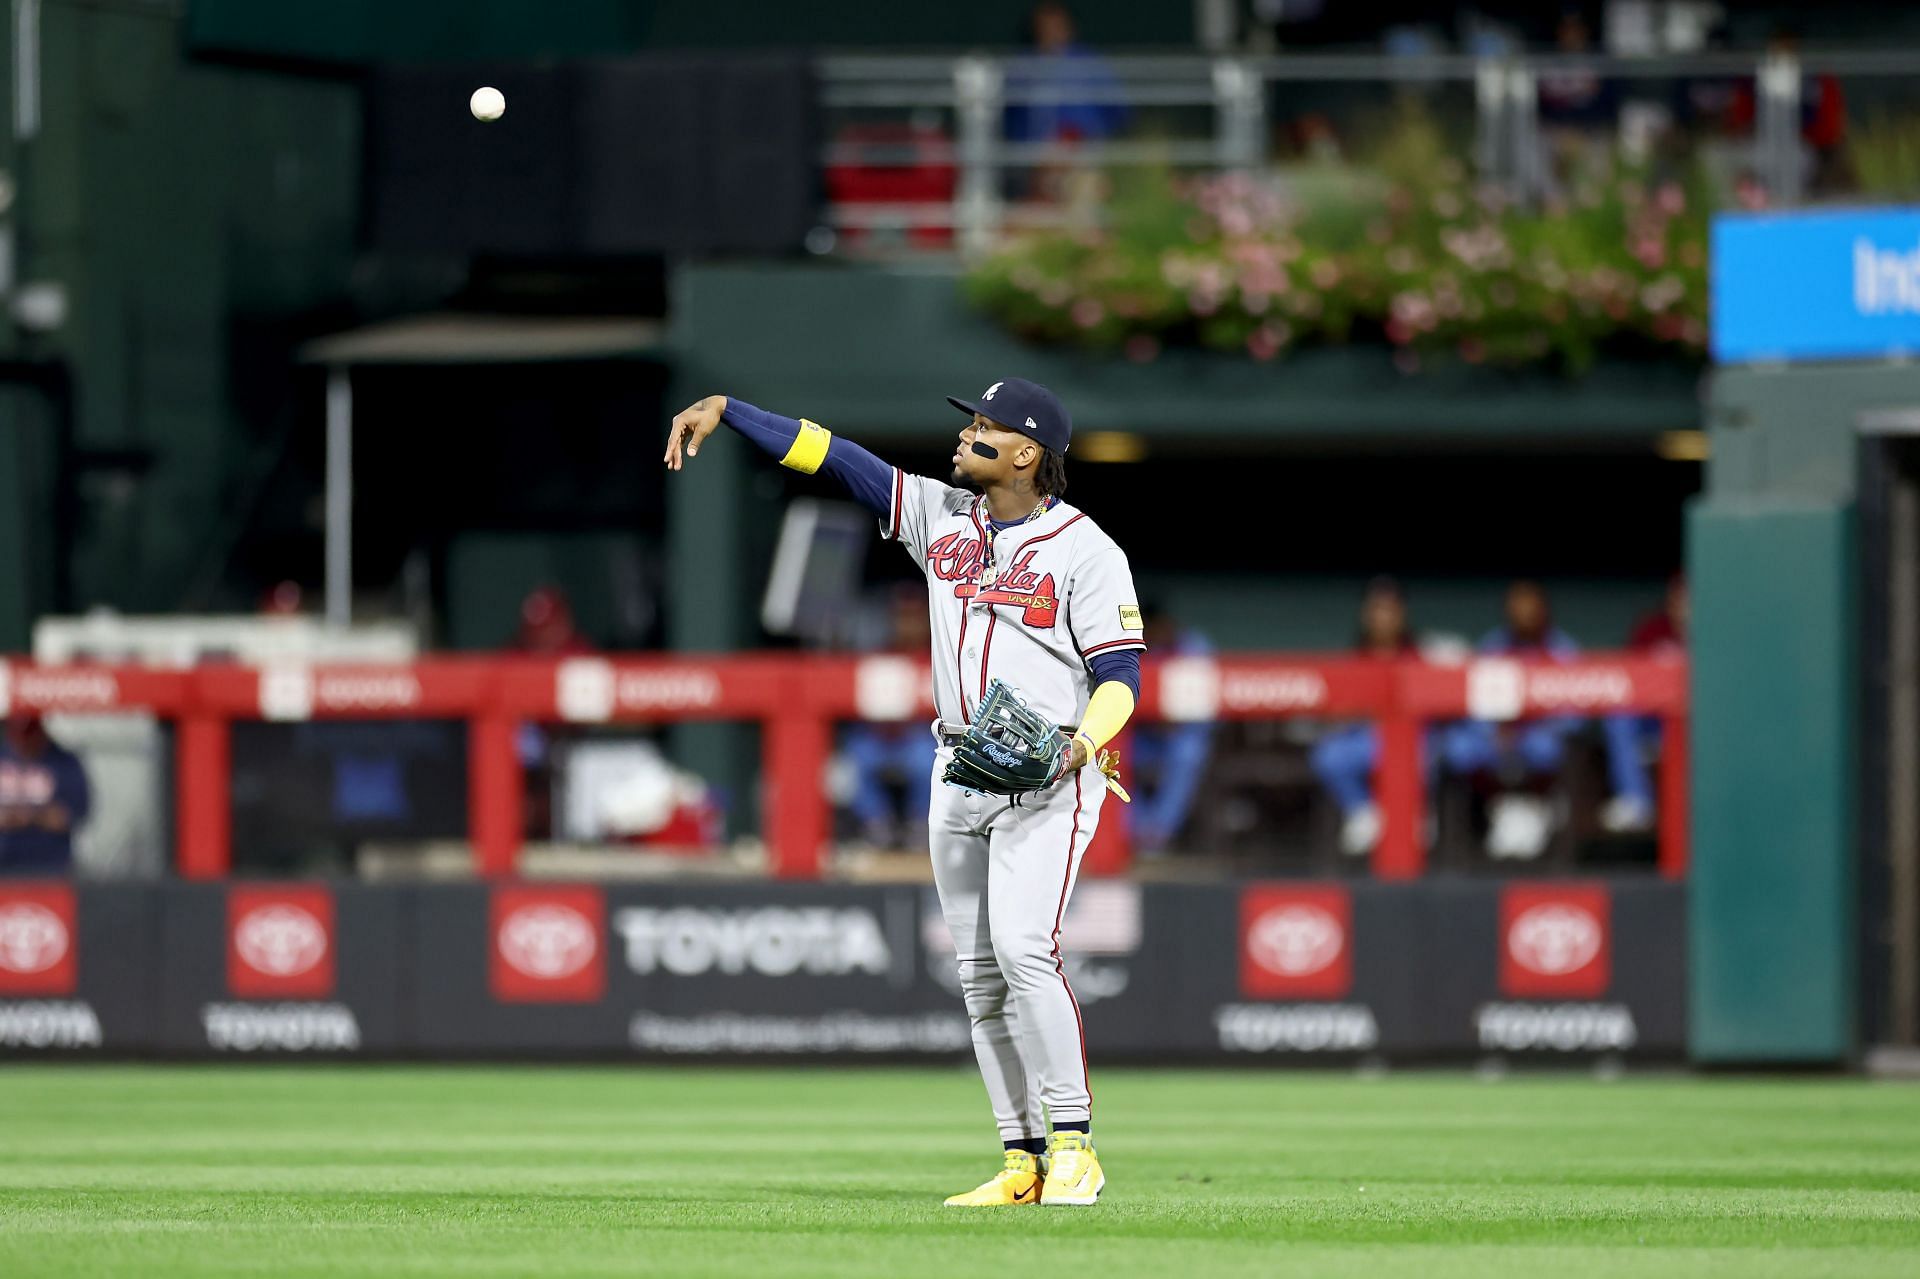 Ronald Acuña Jr. meniscus injury update: Braves star outfielder expected to  be ready for Opening Day